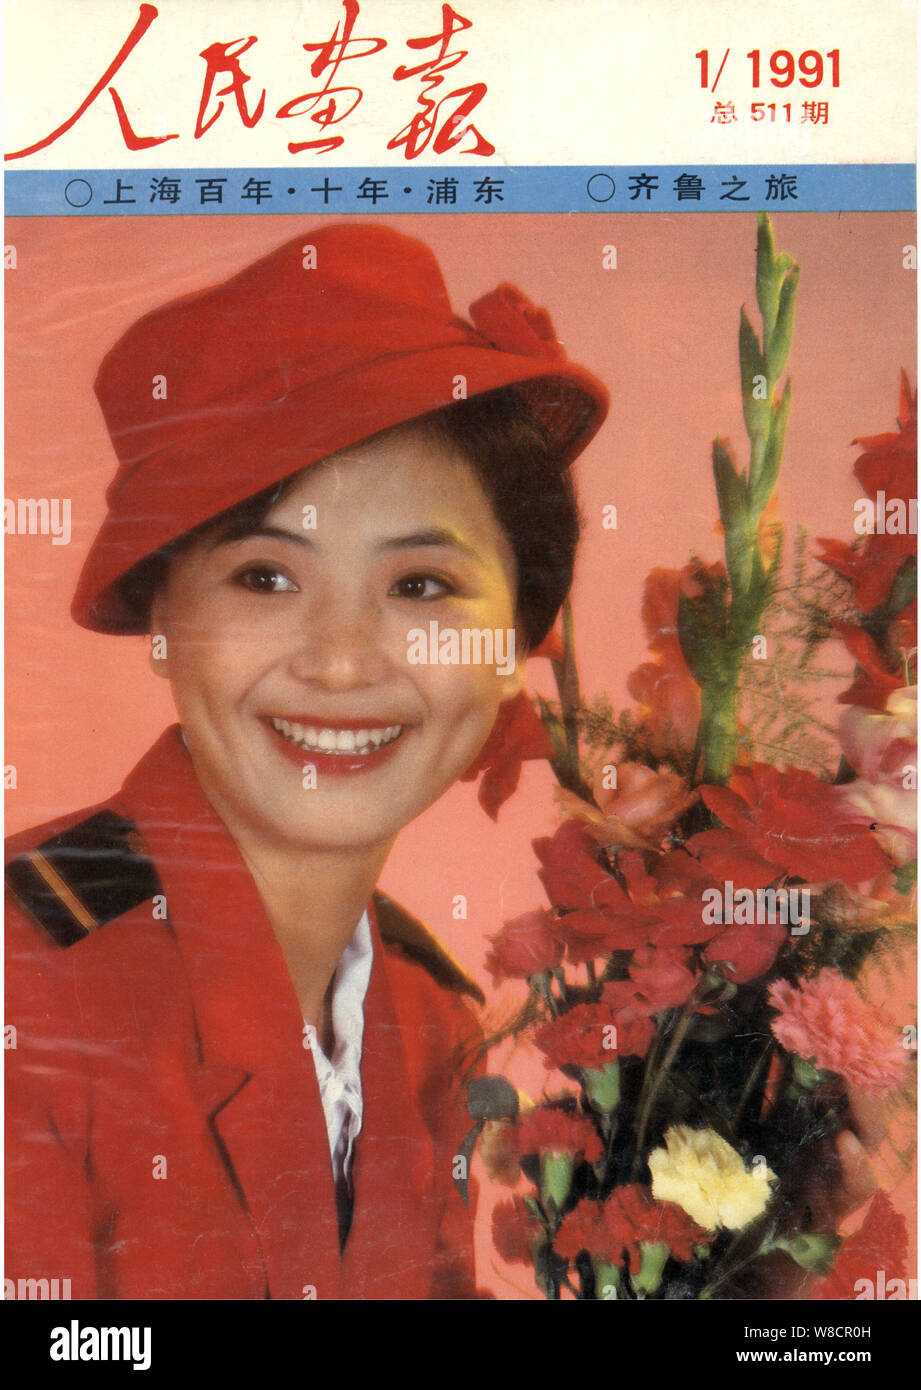 This cover of the China Pictorial issued in January 1991 features a Chinese air hostess wearing uniform of Shanghai Airlines. Stock Photo